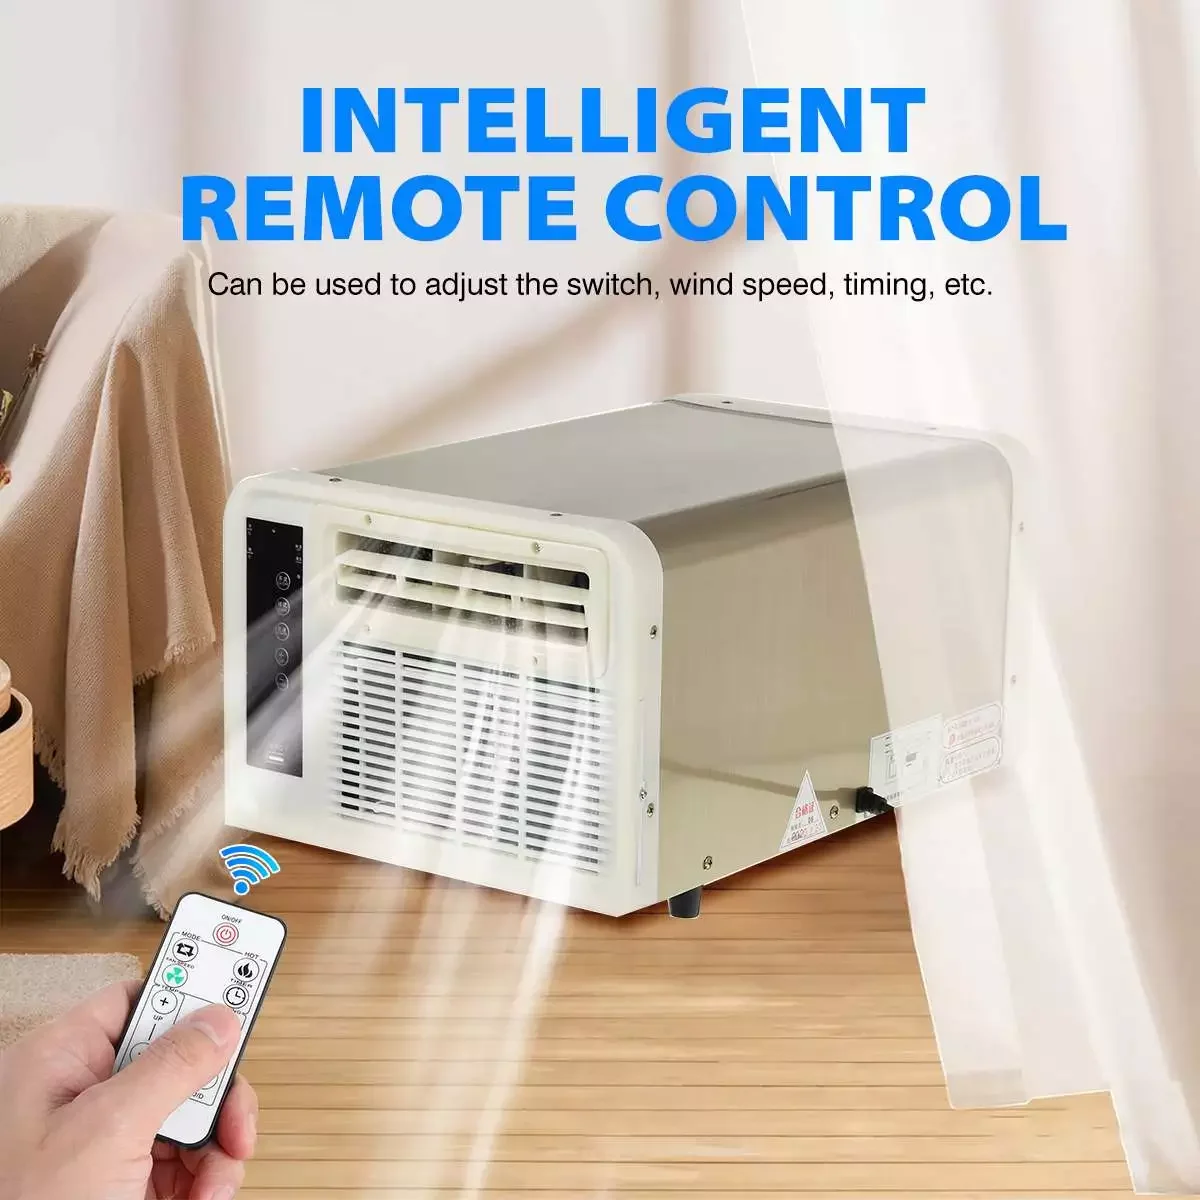 Home Room Dormitory Desktop Air Conditioner 12H Timer Cold/Heat Remote Control Portable Window Air Conditioning Air Cooler 220V enlarge